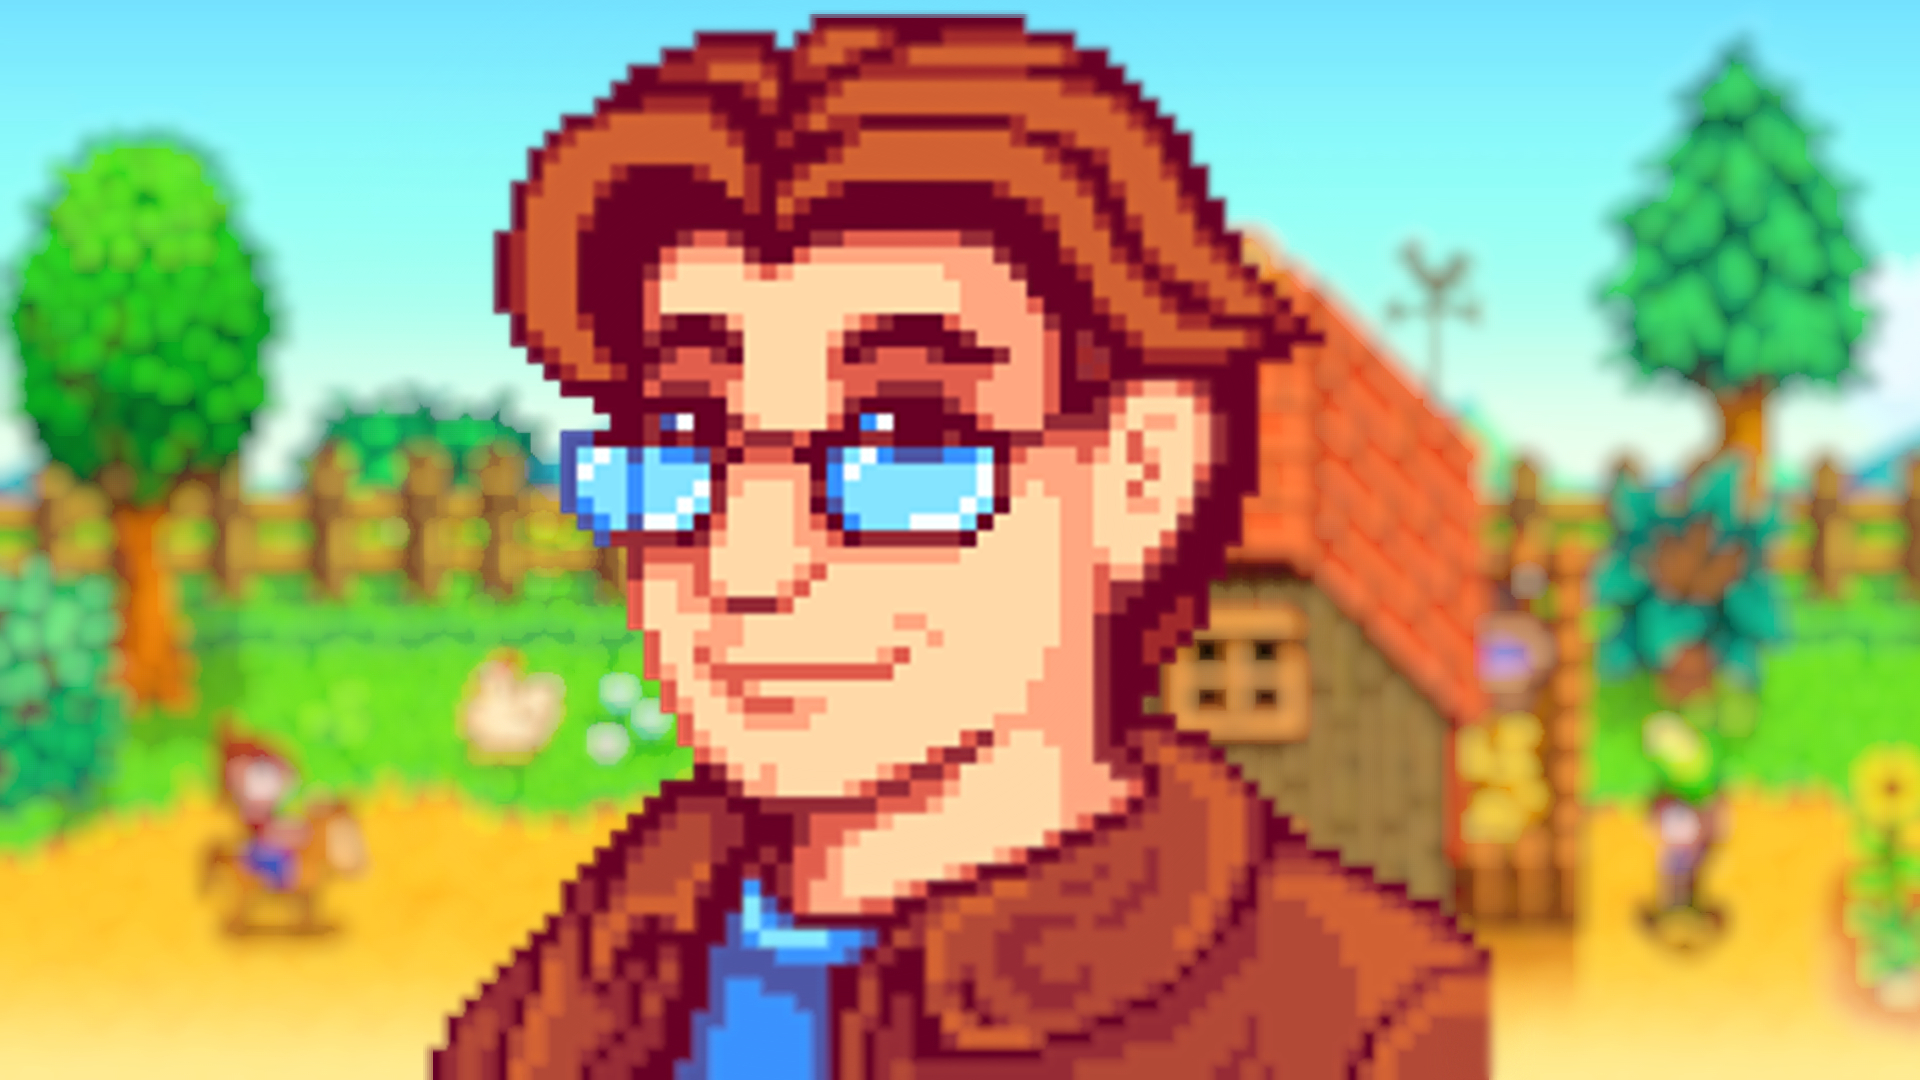 Stardew Valley 1.6 update adds more new content than I expected ...